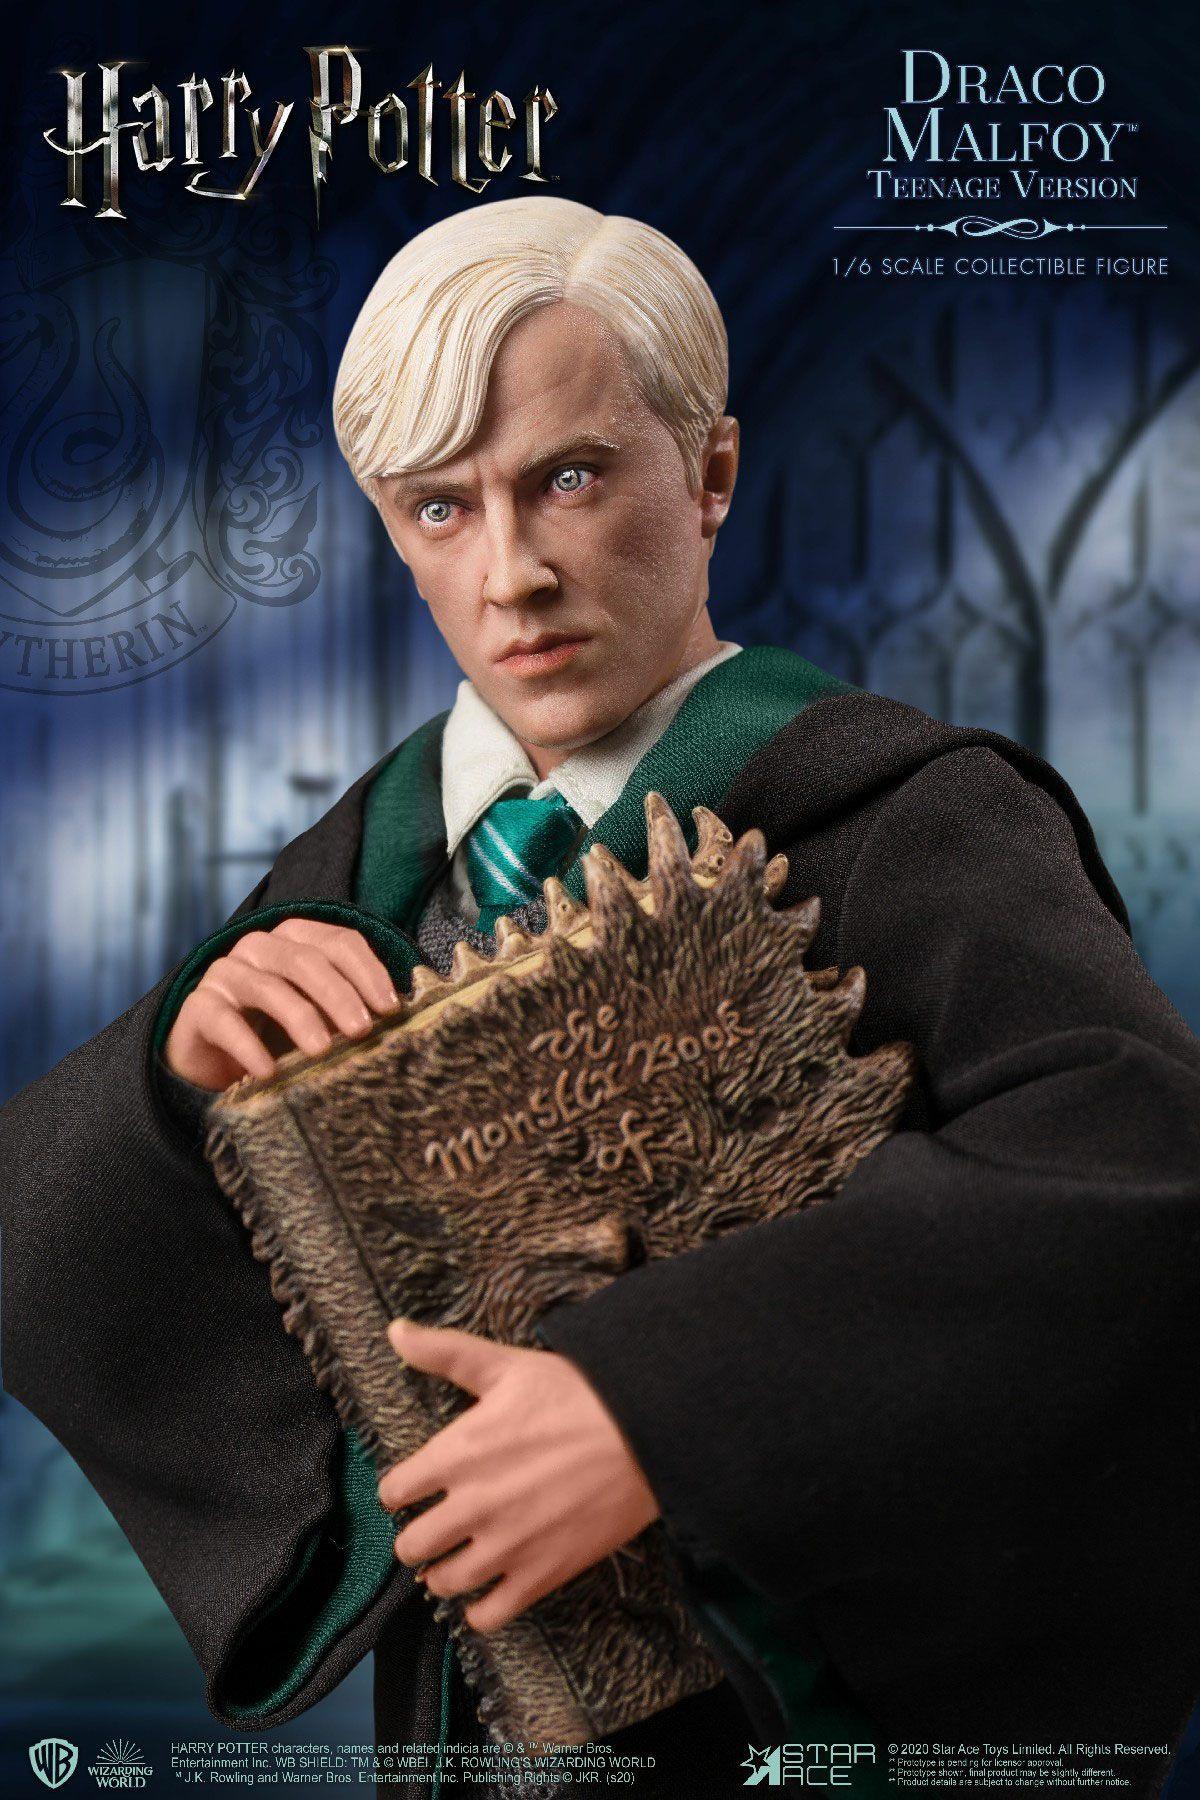 Harry potter my favourite movie figurine 16 draco malfoy teenager deluxe version 26 cm 2 